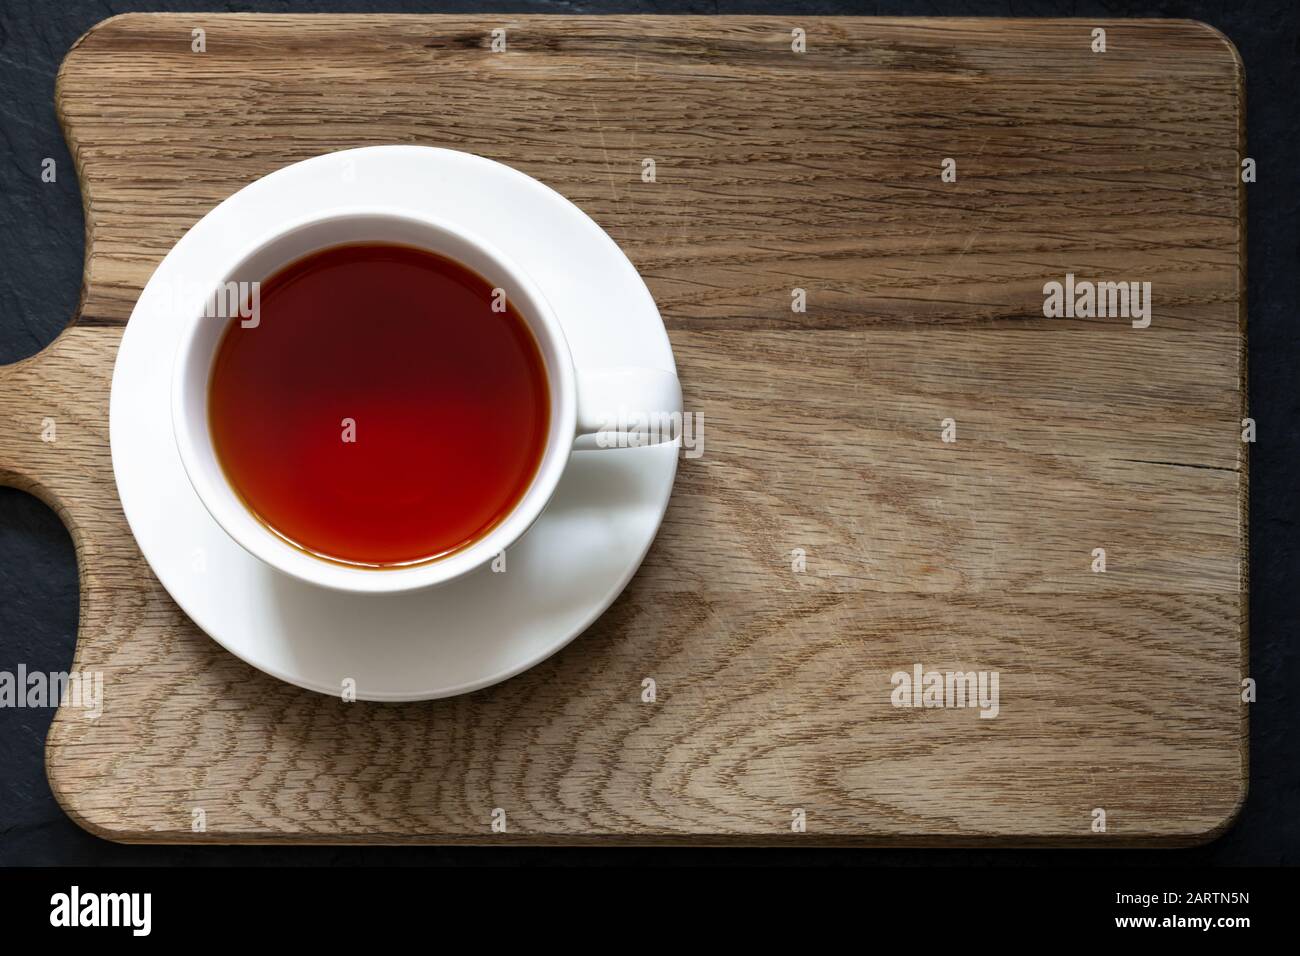 Overhead shot of clear Rooibos tea in white cup and saucer on a wooden chopping board with black slate below. Stock Photo